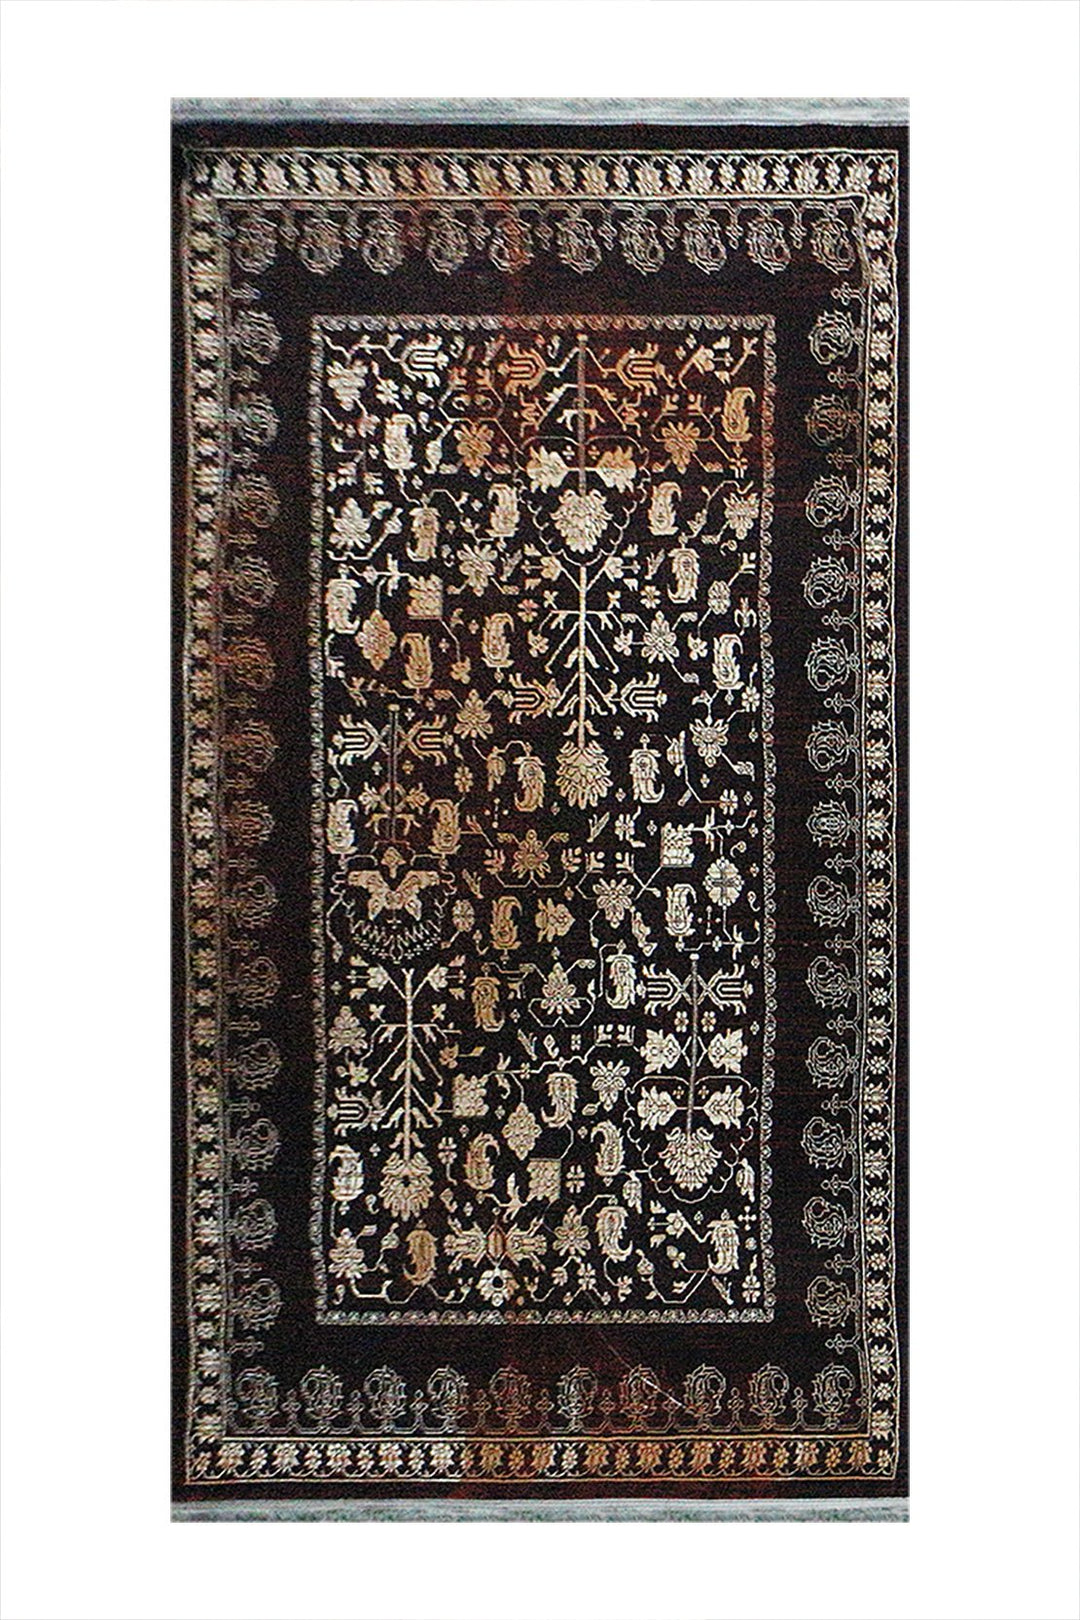 Iranian Premium Farsh E Almas Rug - Red and Cream - 5.4 x 9.8 FT - Resilient Construction for Long-Lasting Use - V Surfaces